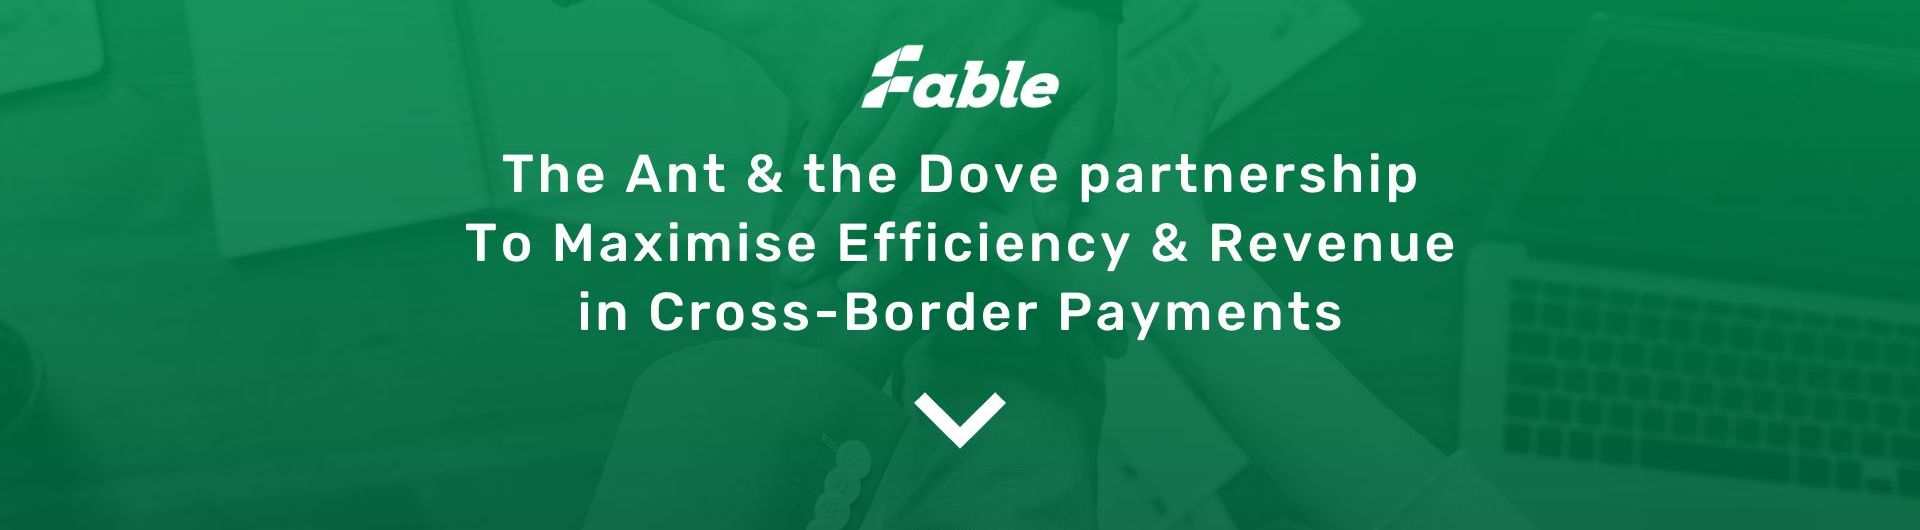 The Ant And The Dove Partnership: To Maximise Efficiency And Revenue In Cross-Border Payments